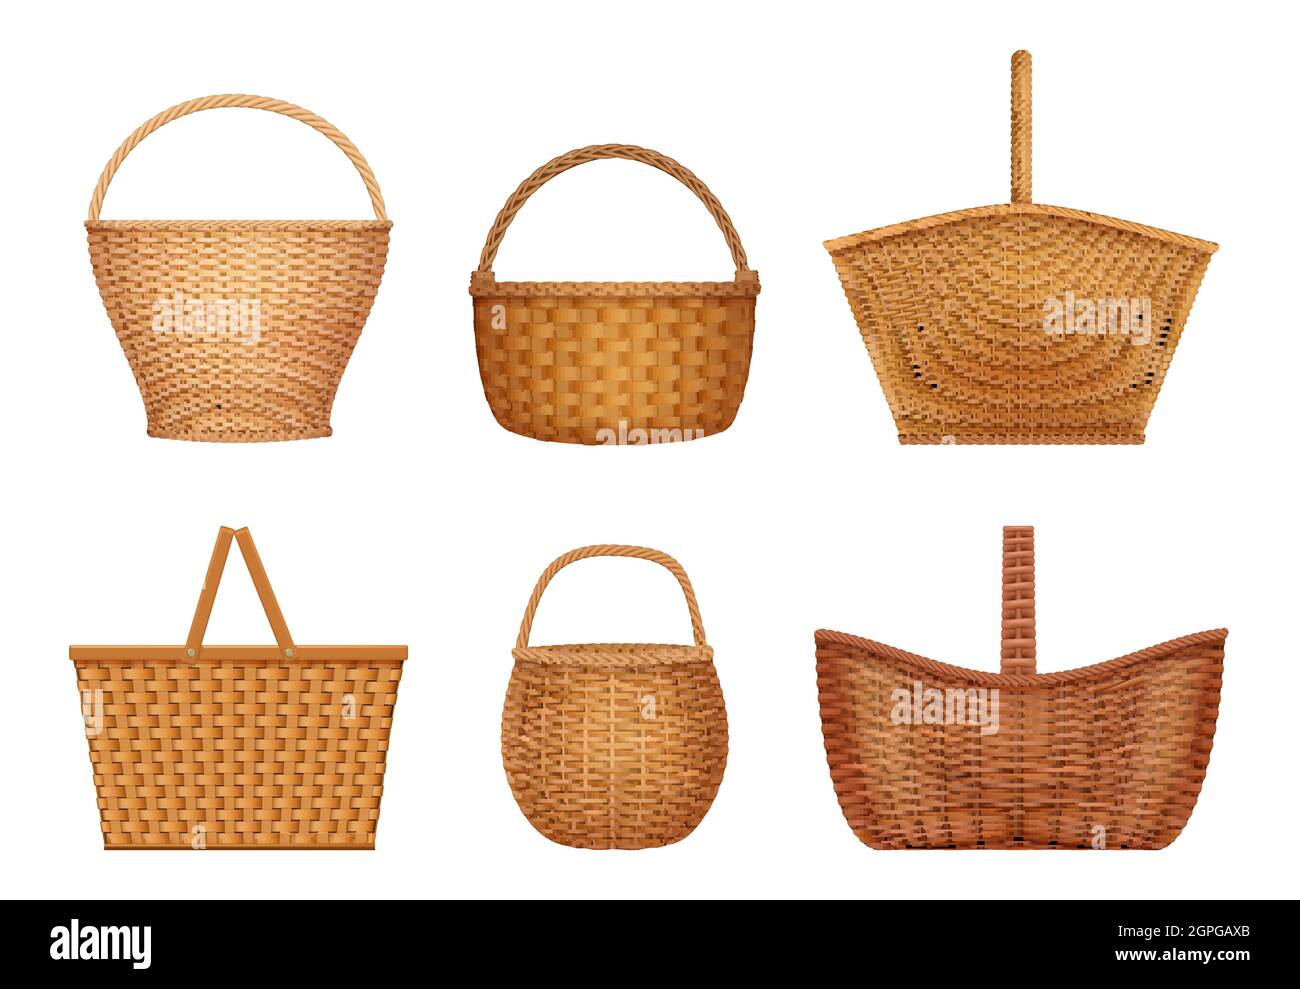 Wicker basket. Handcraft decorative picnic containers for nature products vector realistic illustrations Stock Vector